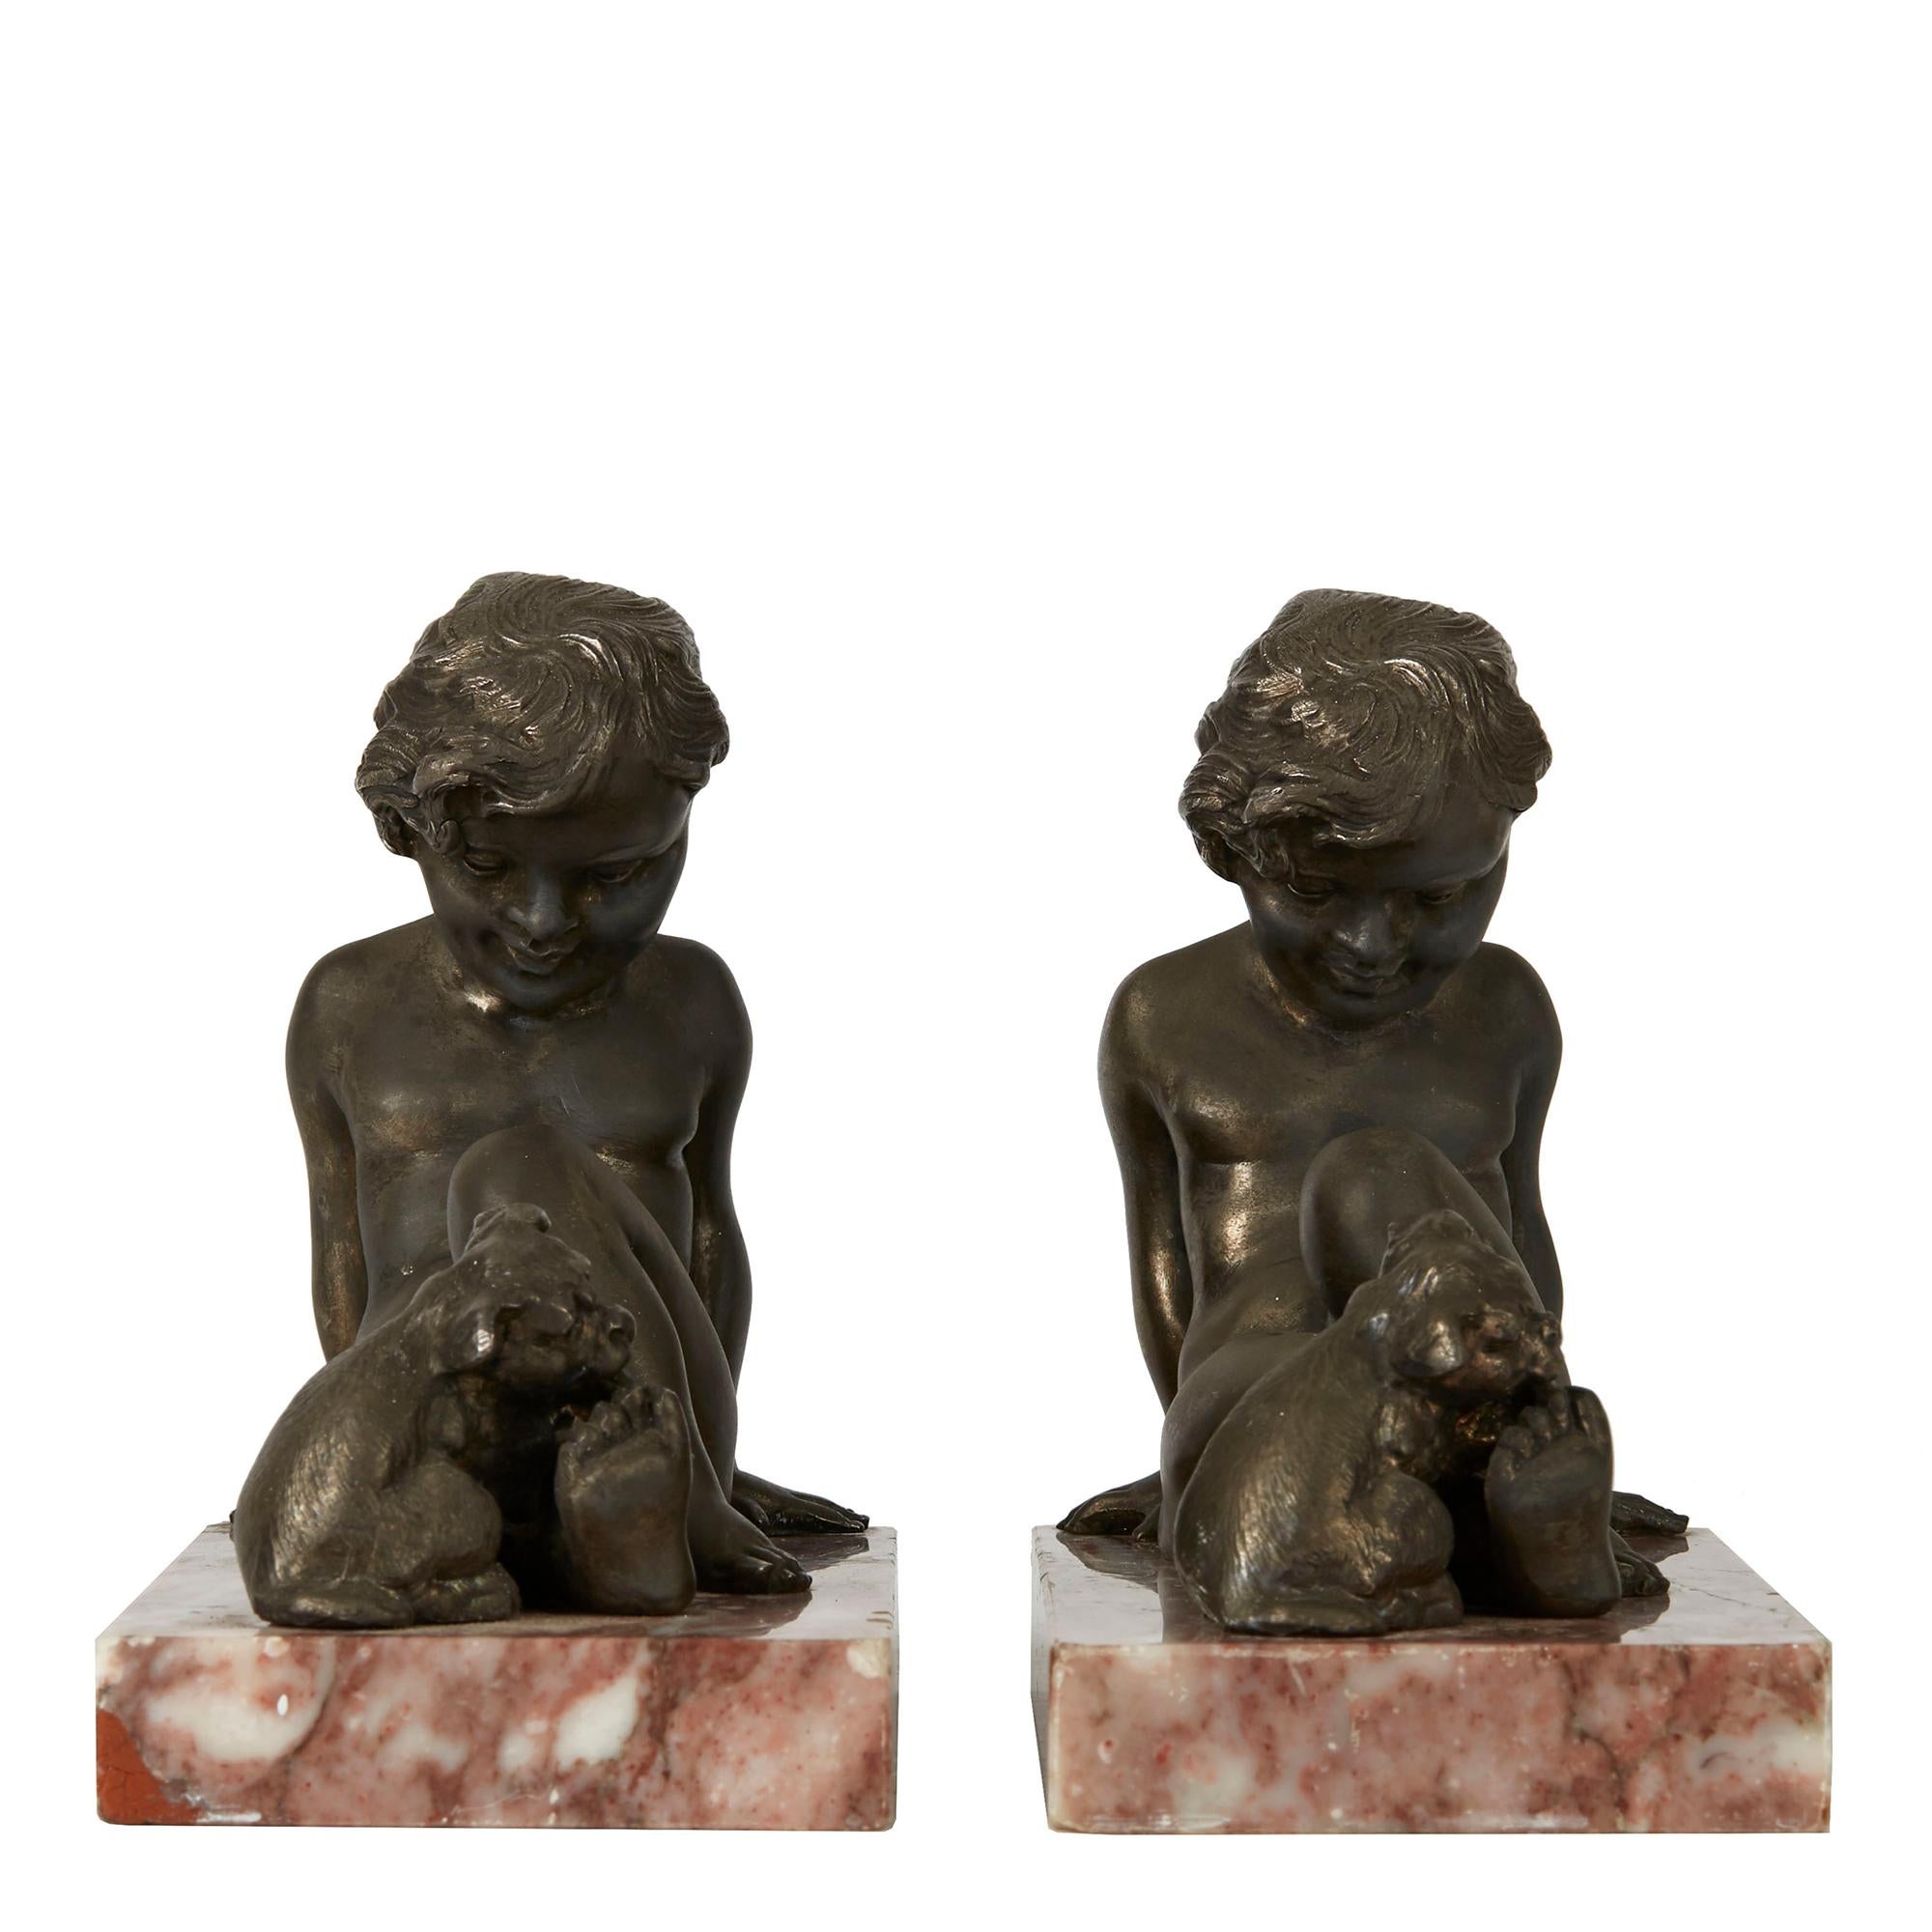 European Art Deco Pair of Boy and Puppy Metal Bookends, 1930s